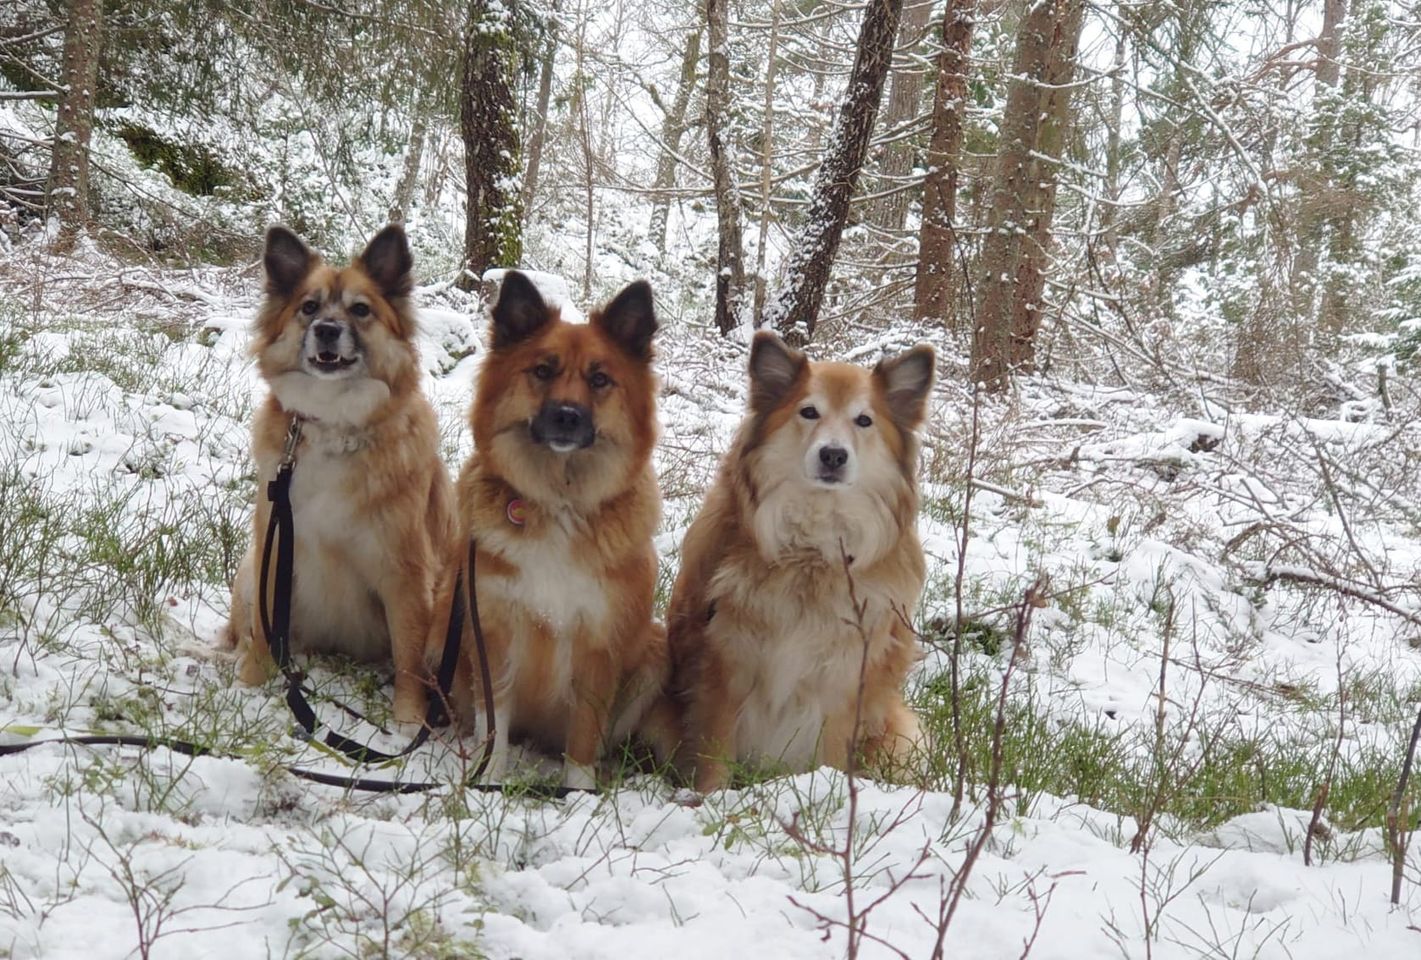 Sweden Icelandic Sheepdogs in the snow.